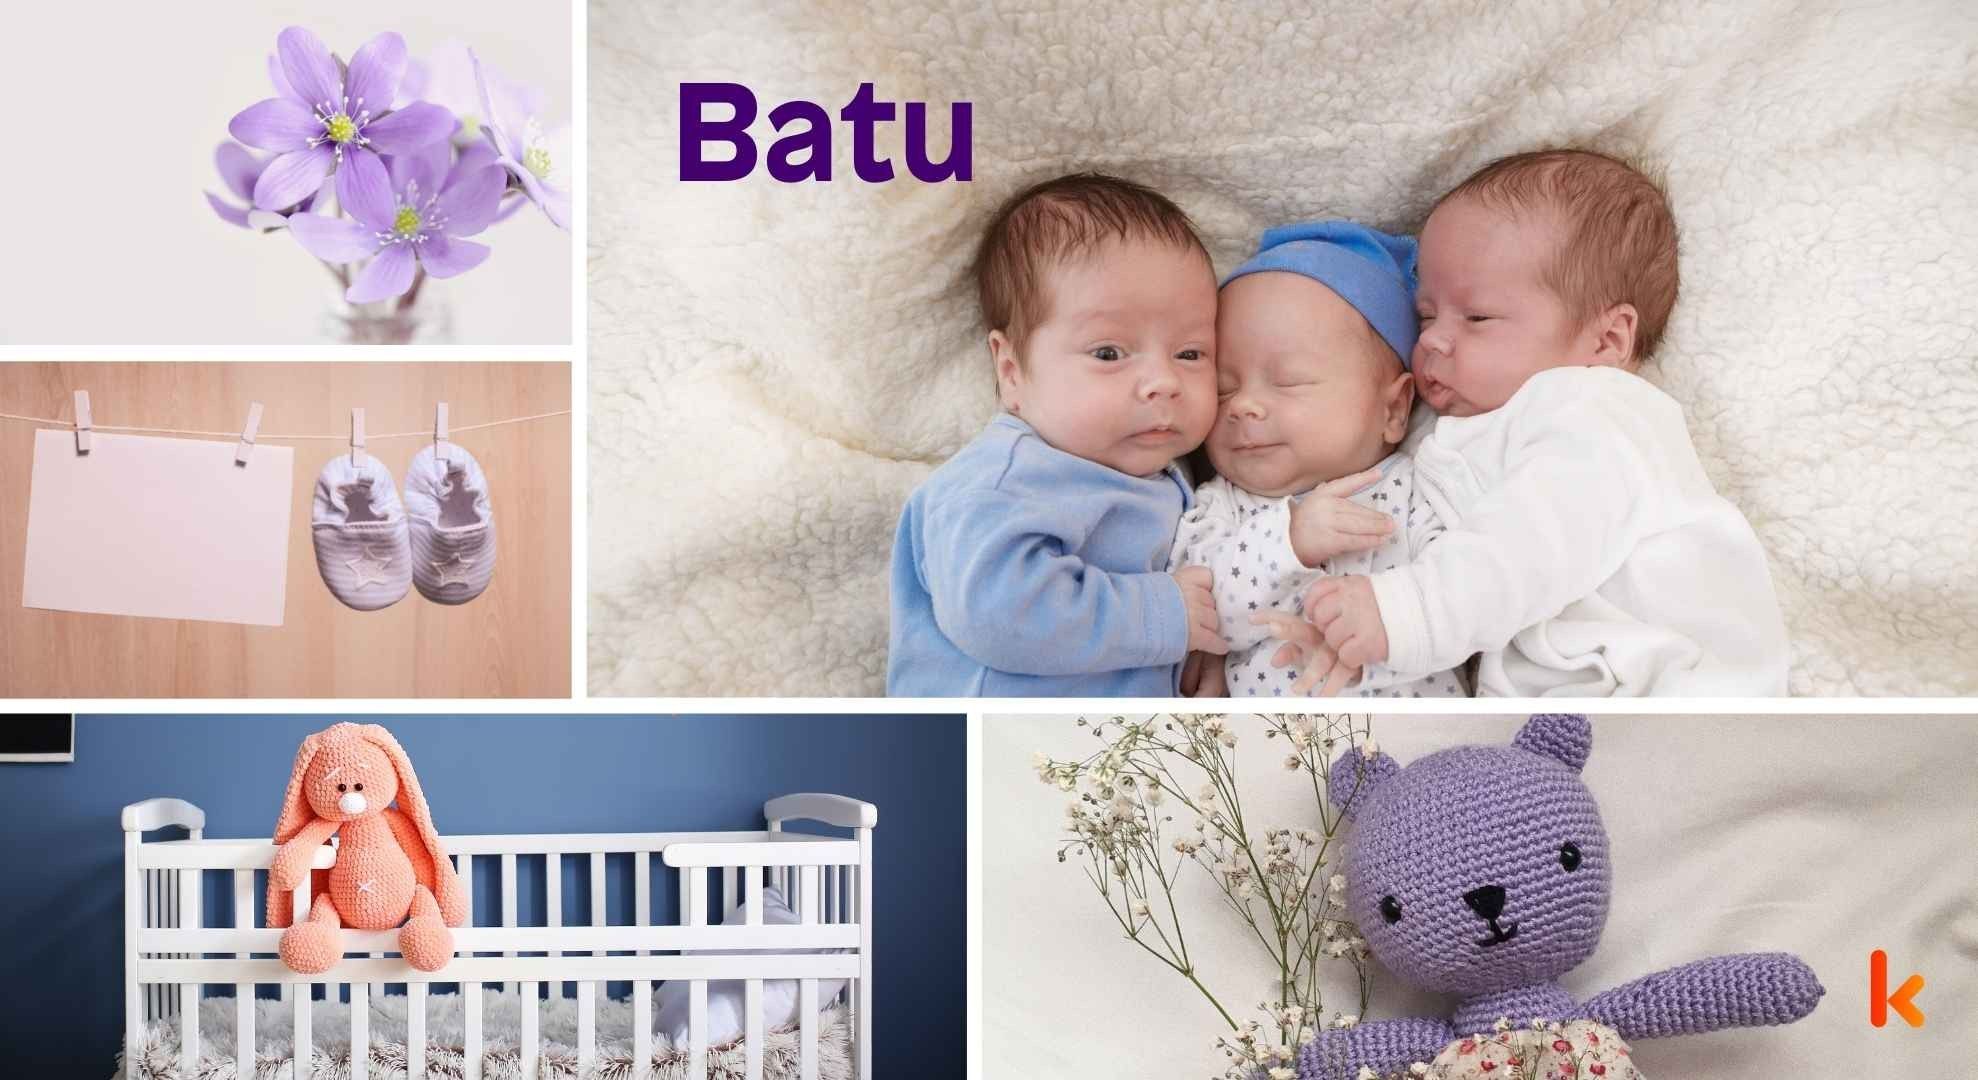 Meaning of the name Batu